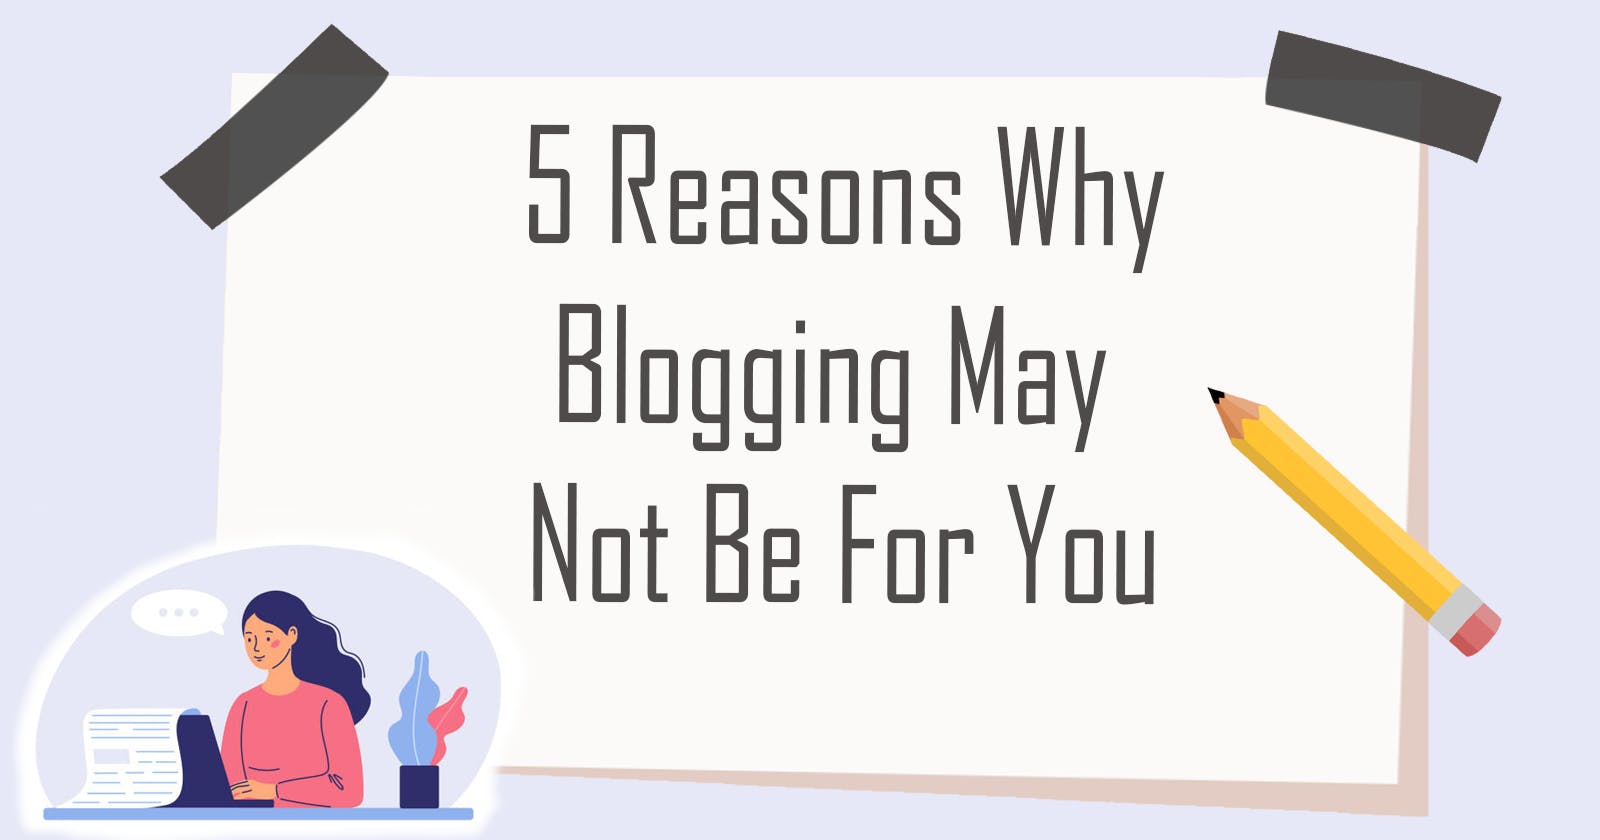 5 Reasons Why Blogging May Not Be For You